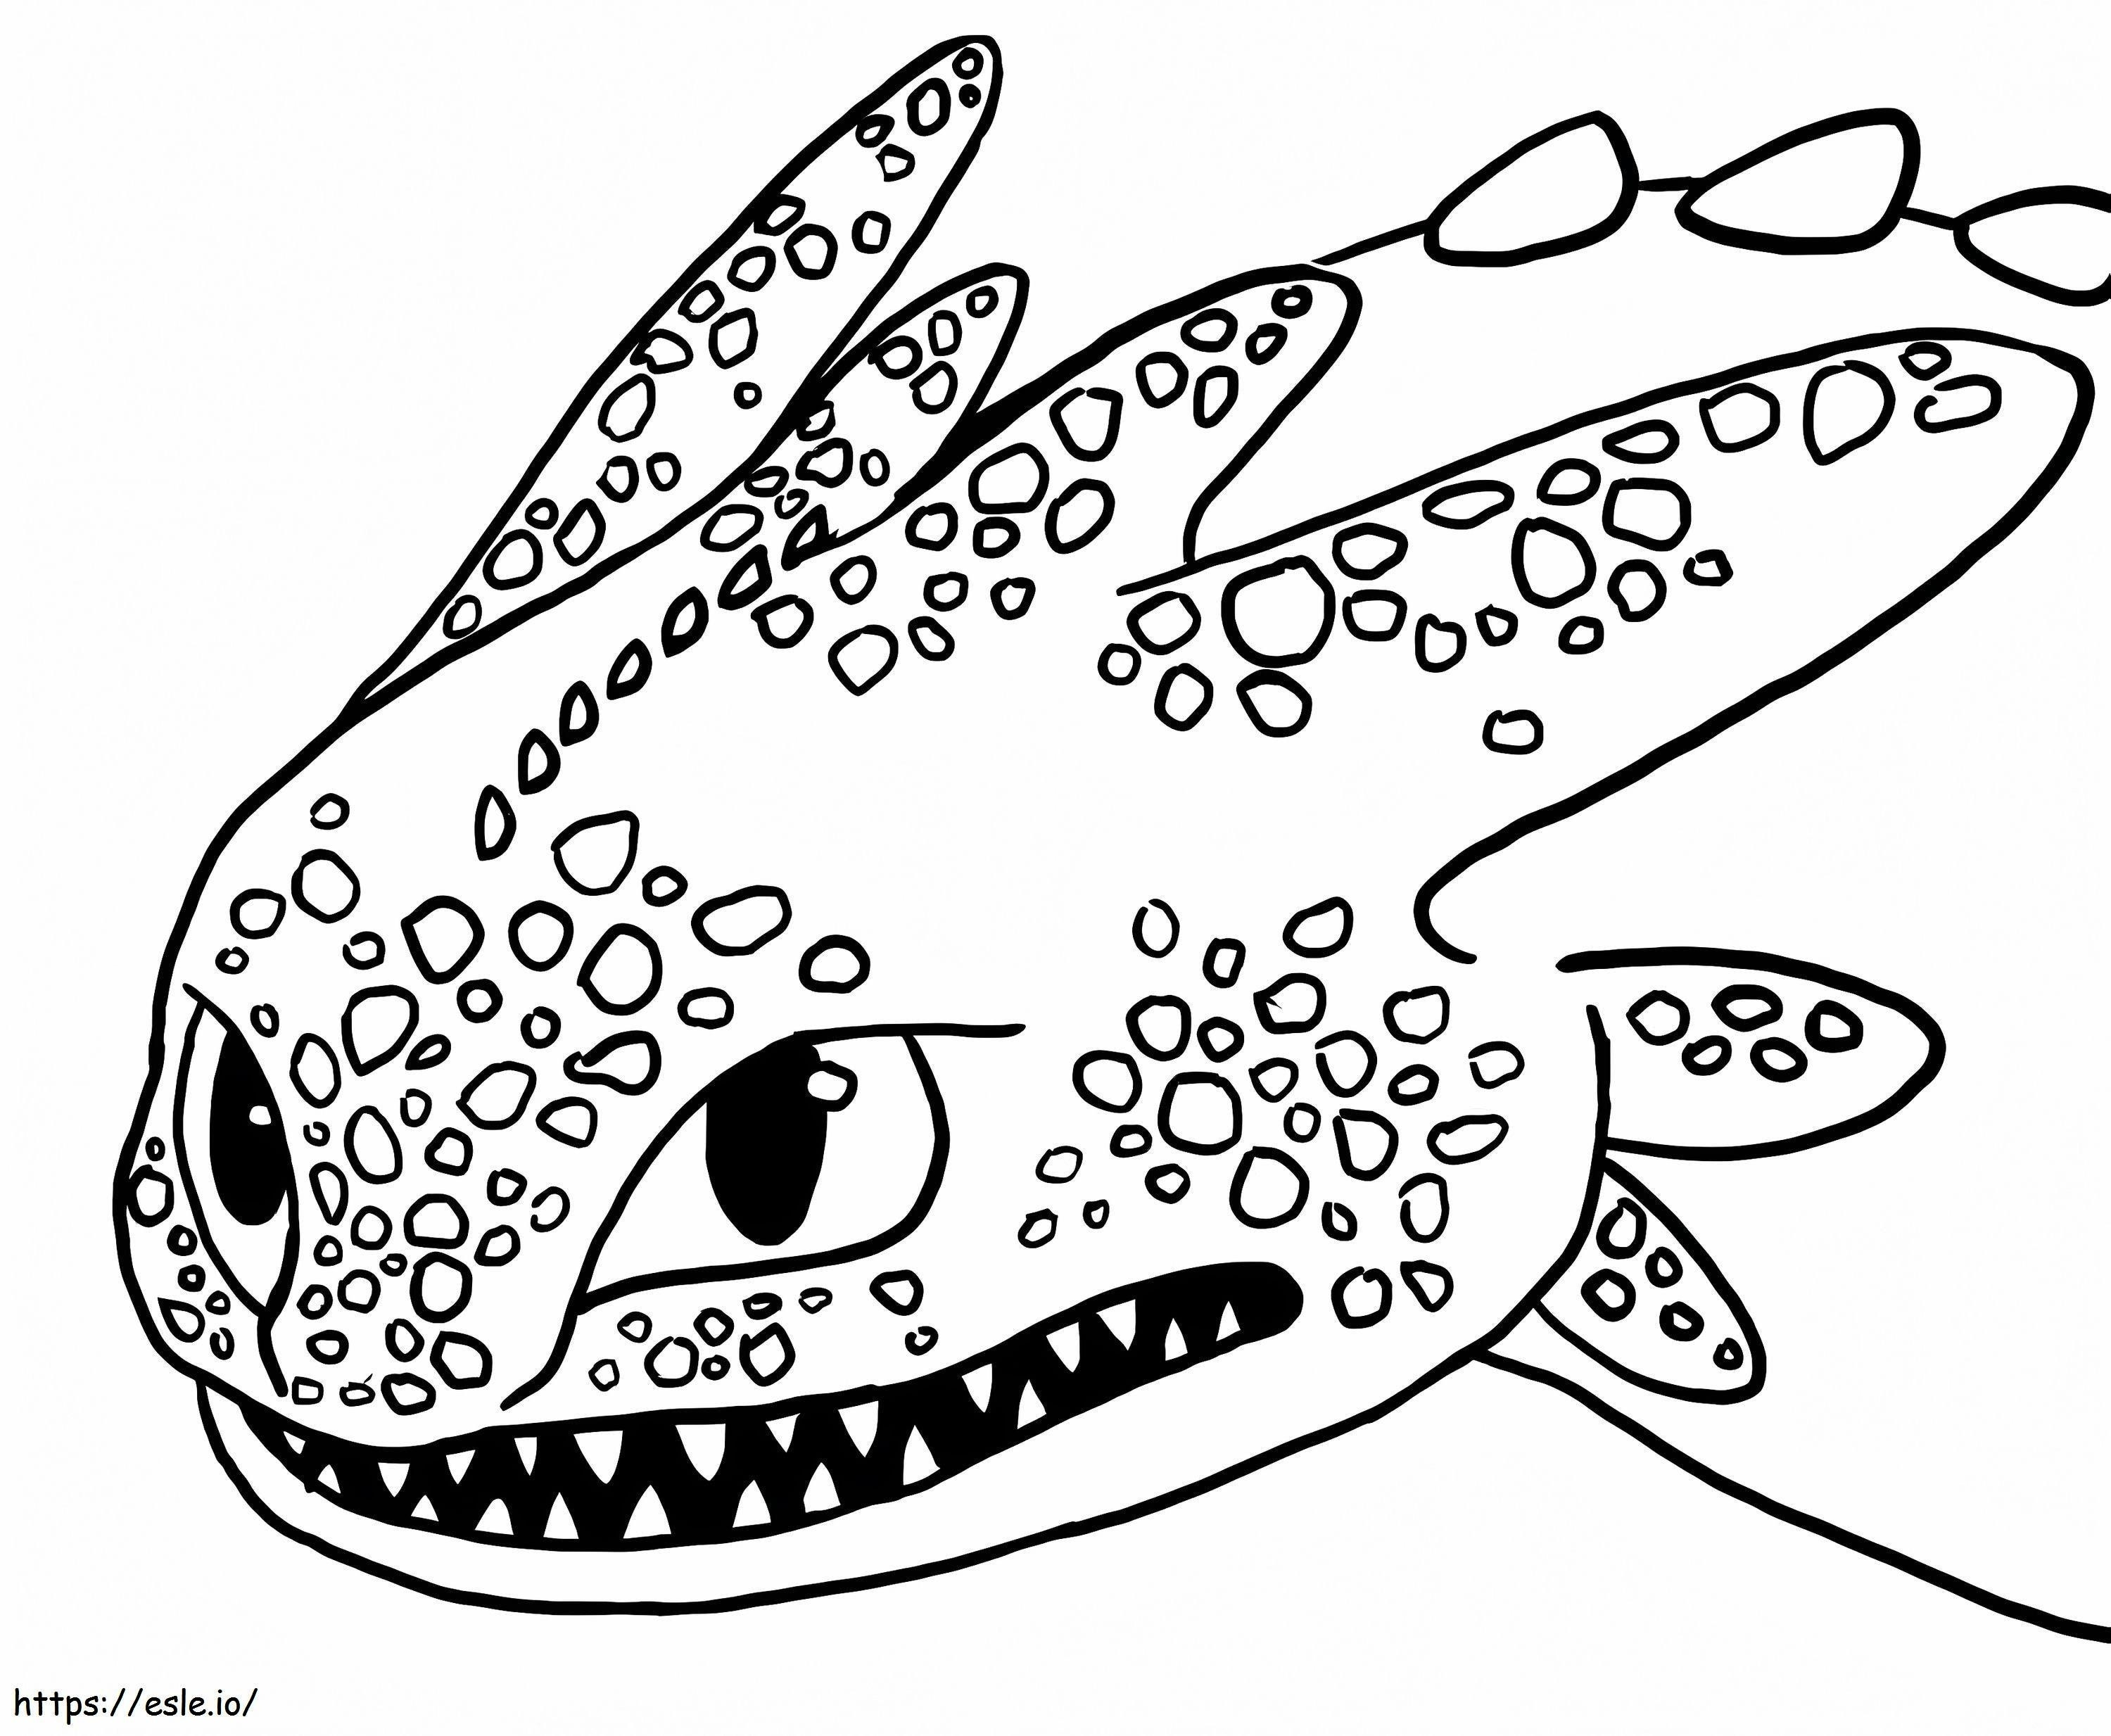 Toothless Head coloring page